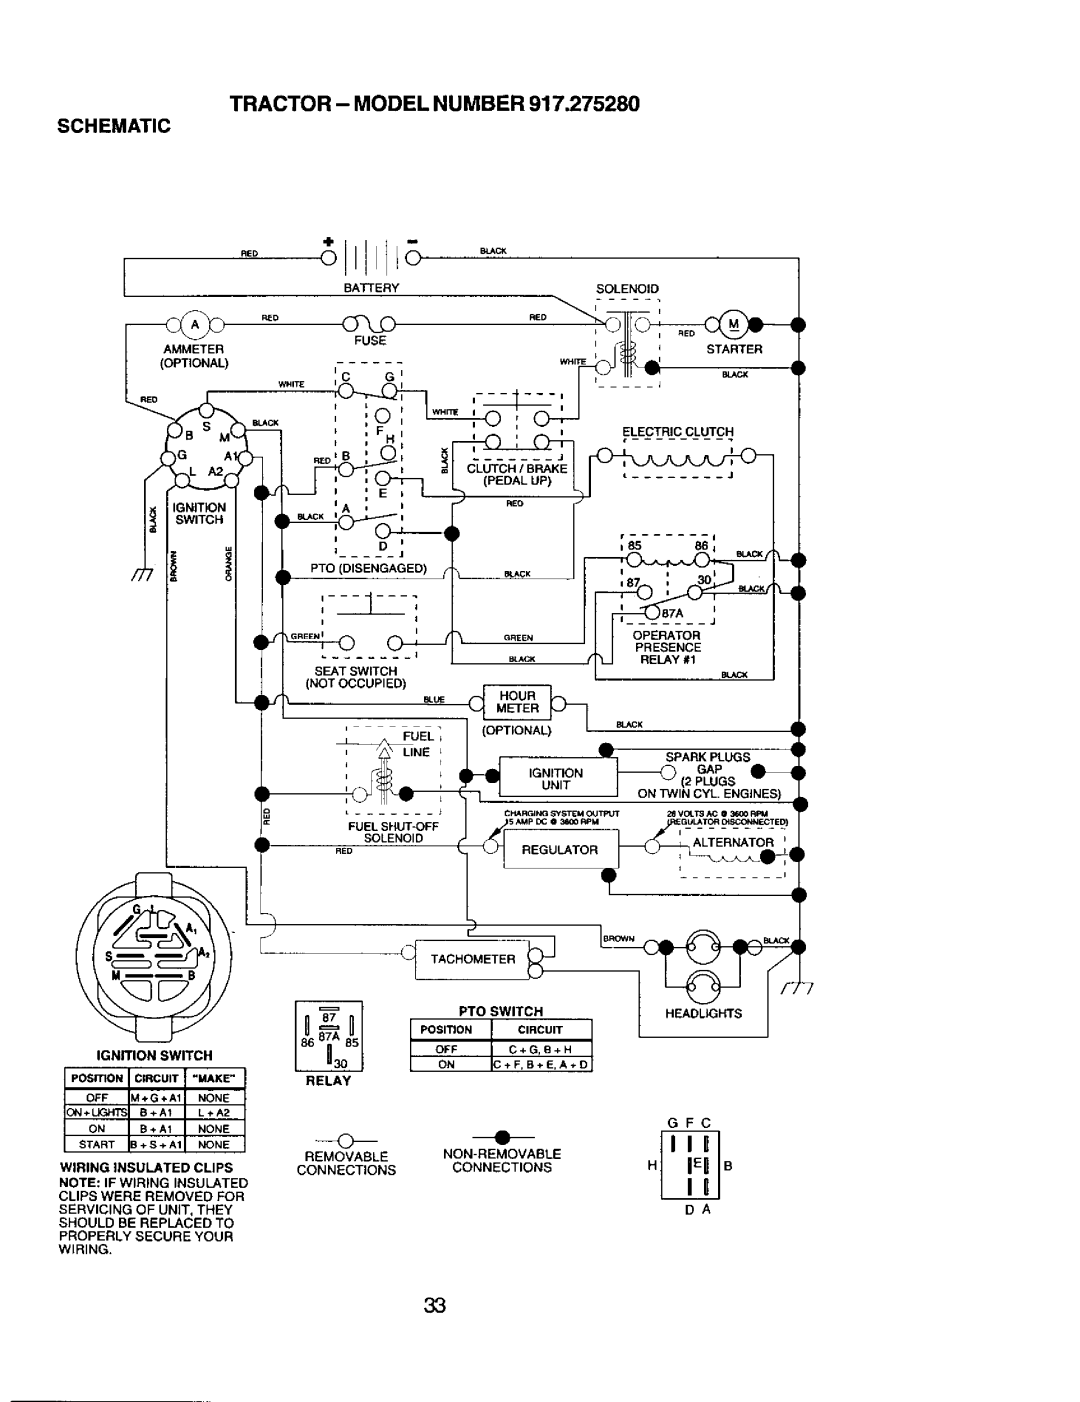 Craftsman 917.27528 owner manual Tractor Model Number Schematic, Relay 